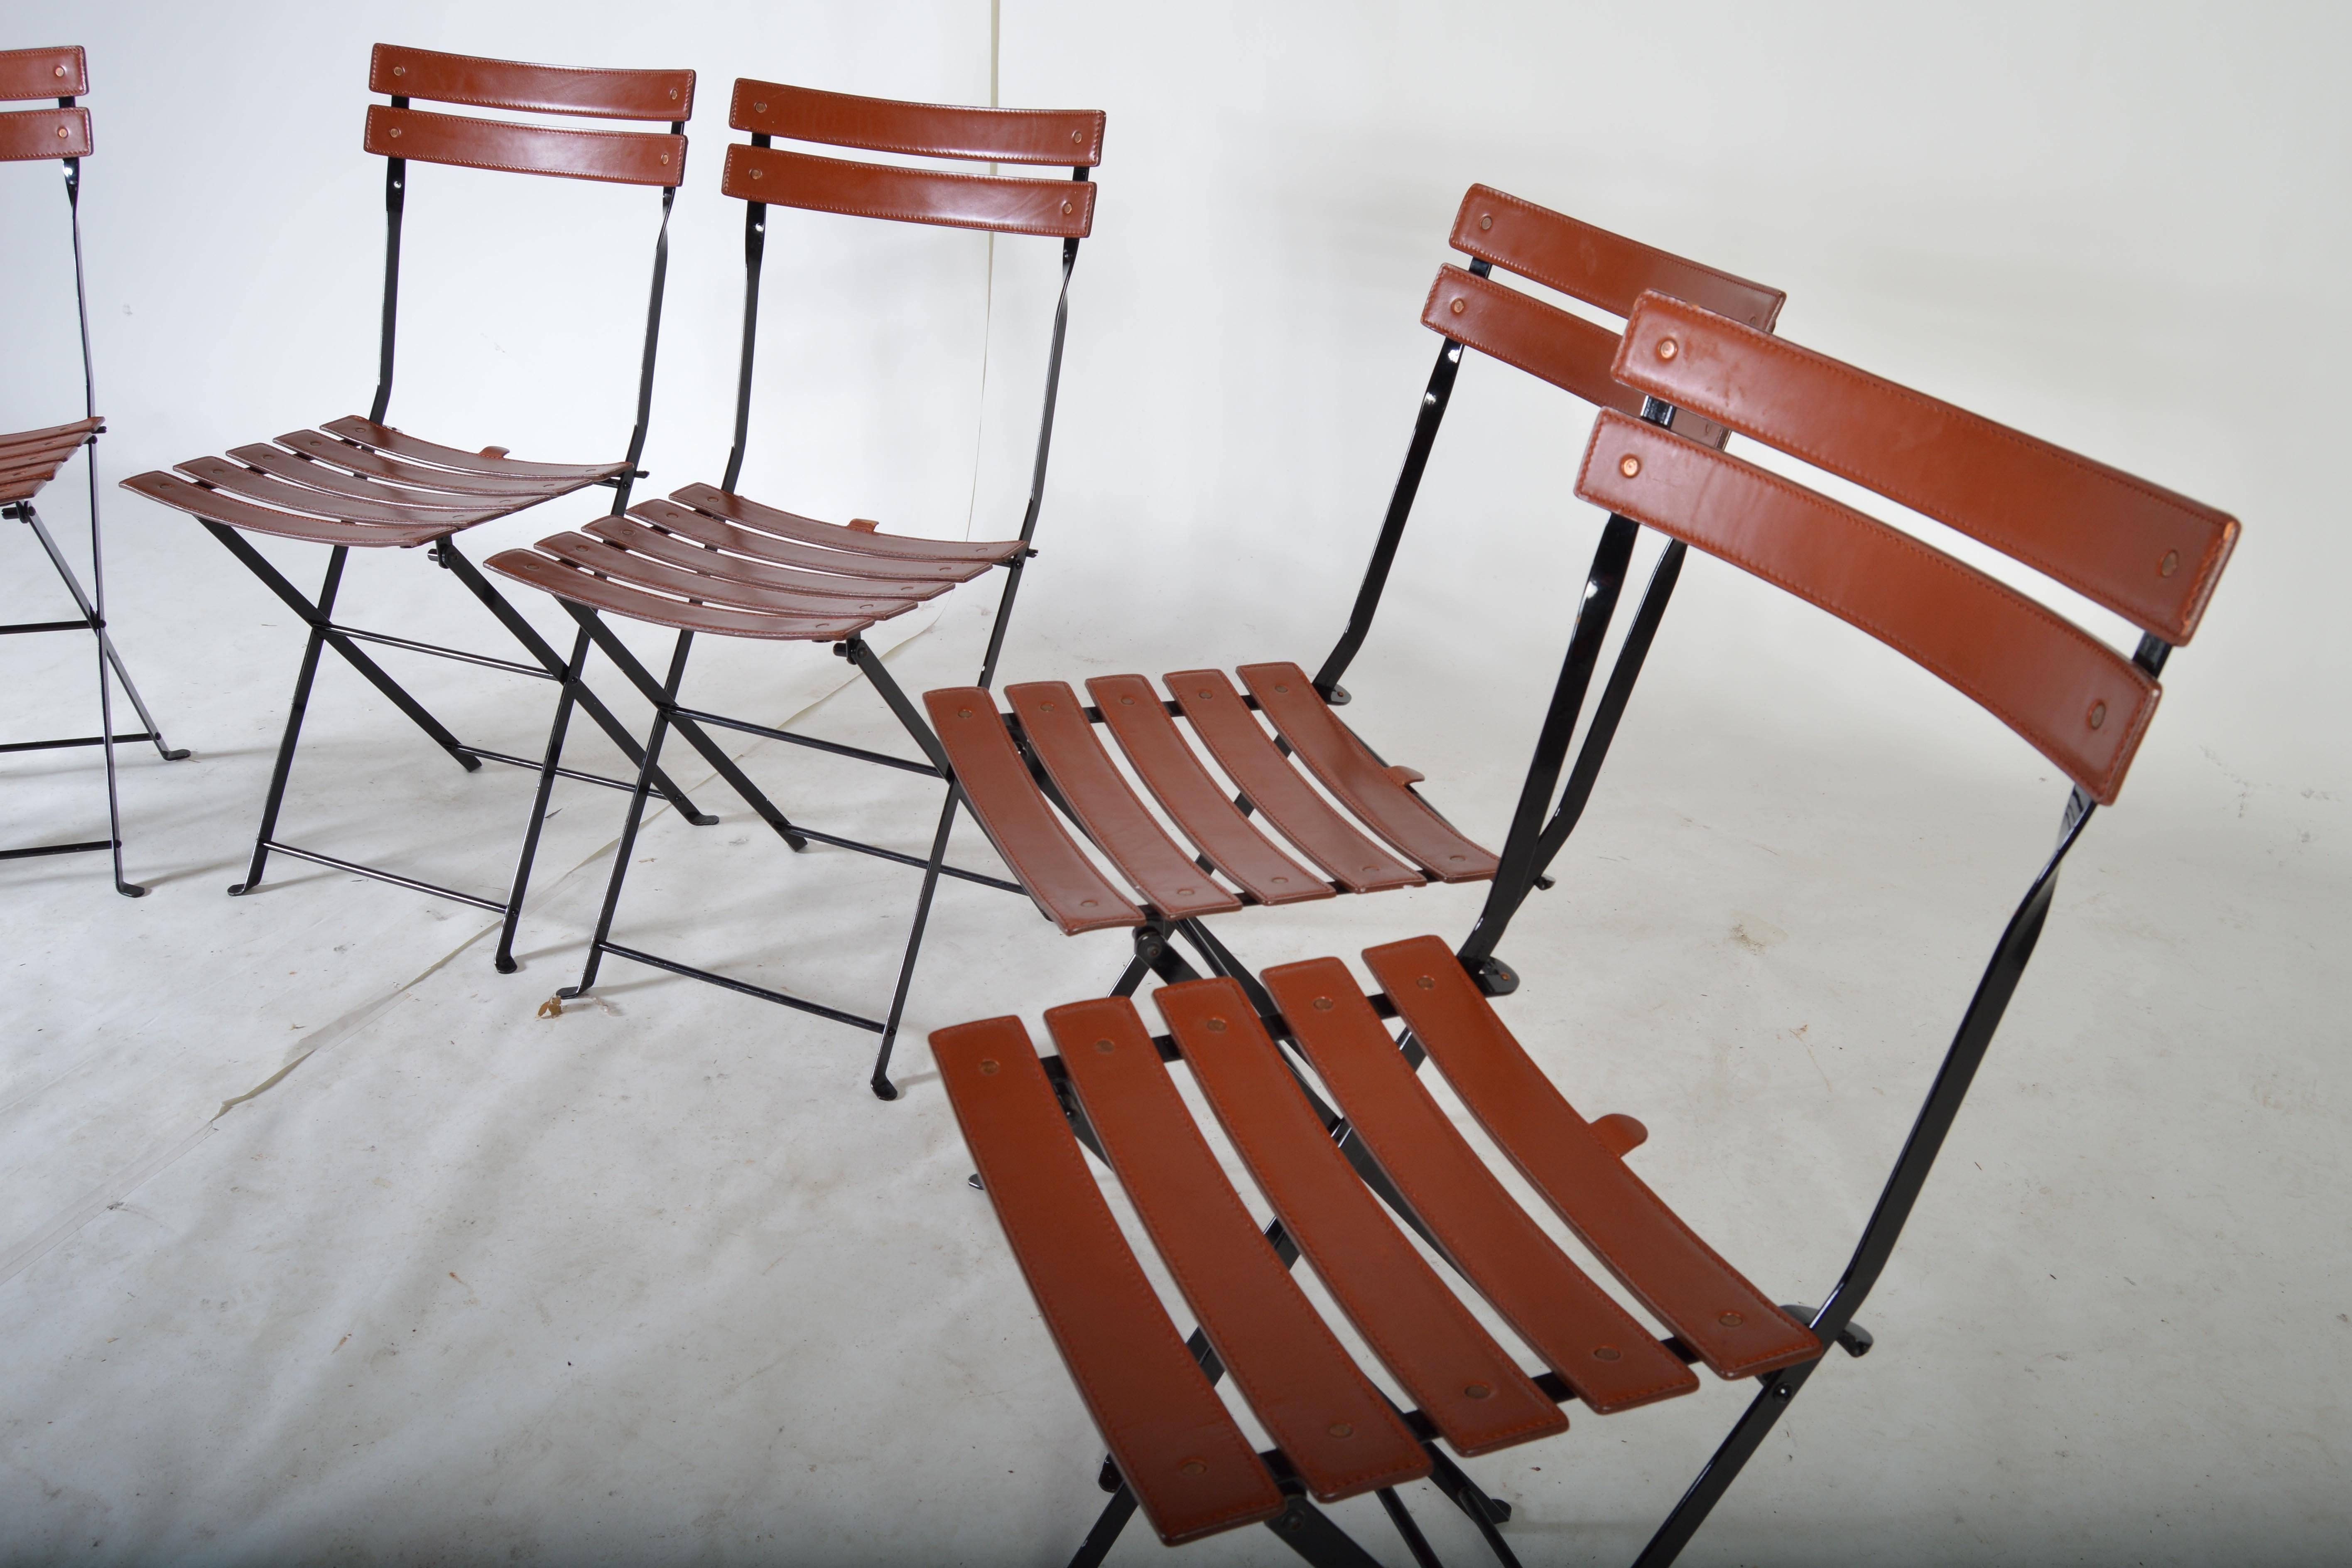 A beautiful set of vintage Marco Zanuso "Celestina" folding chairs having leather seat and backrest with iron frames. In fantastic vintage condition.